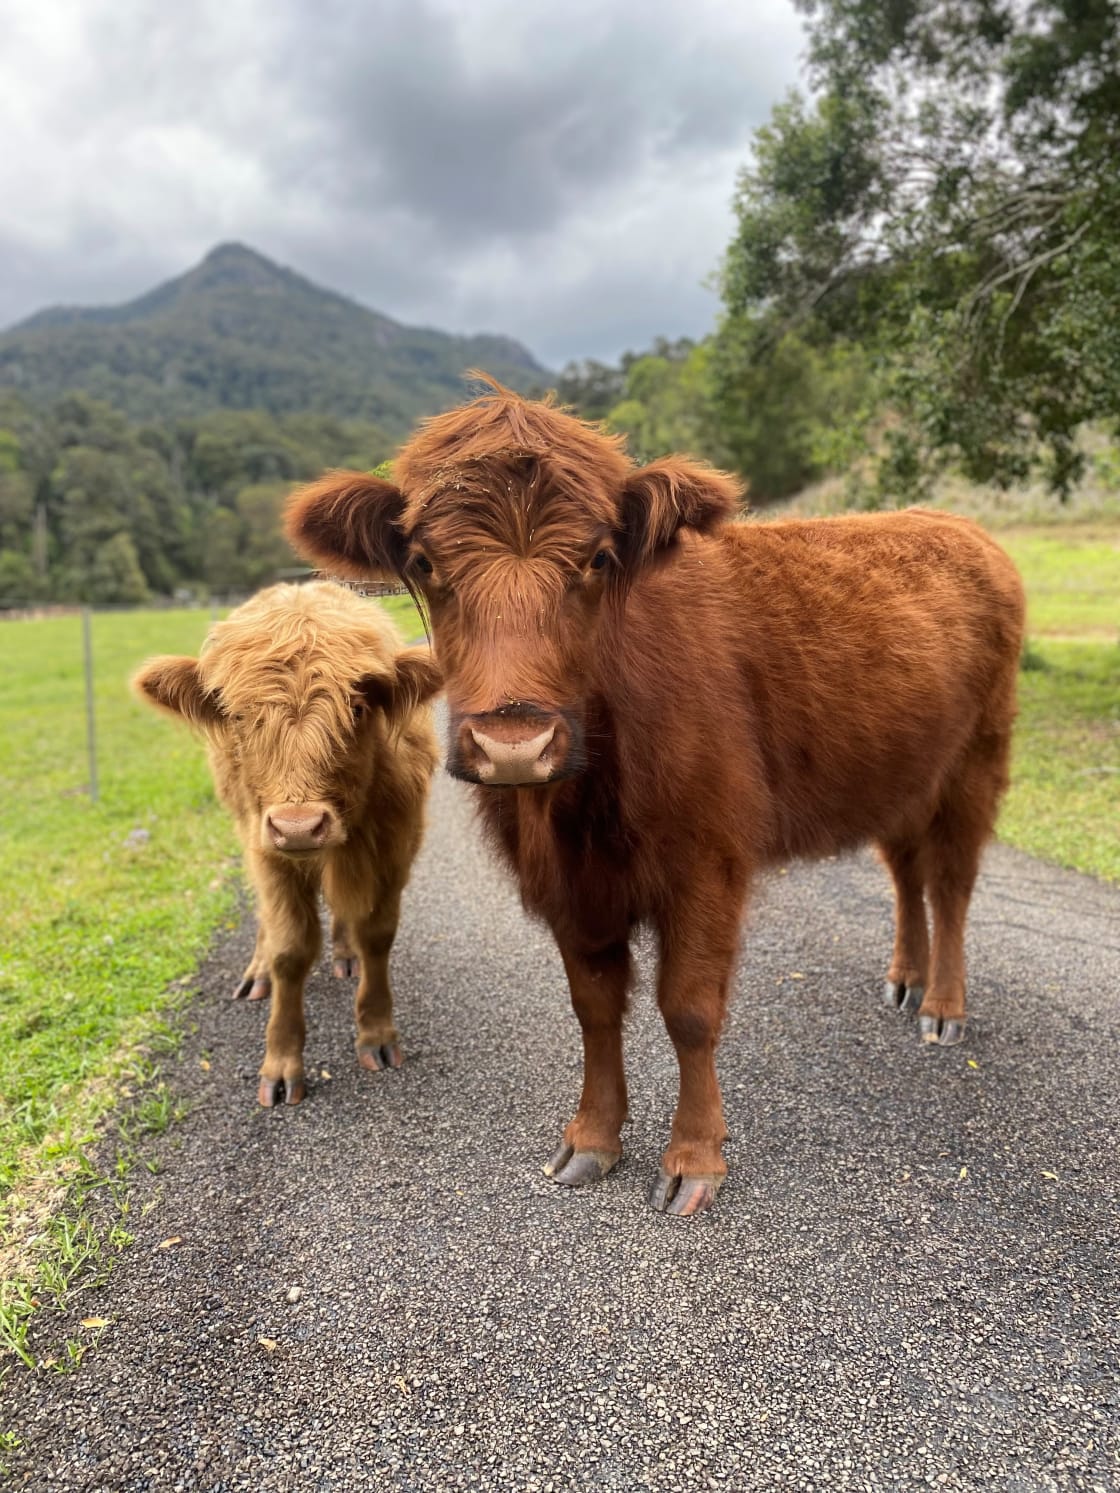 Our Highland Cows